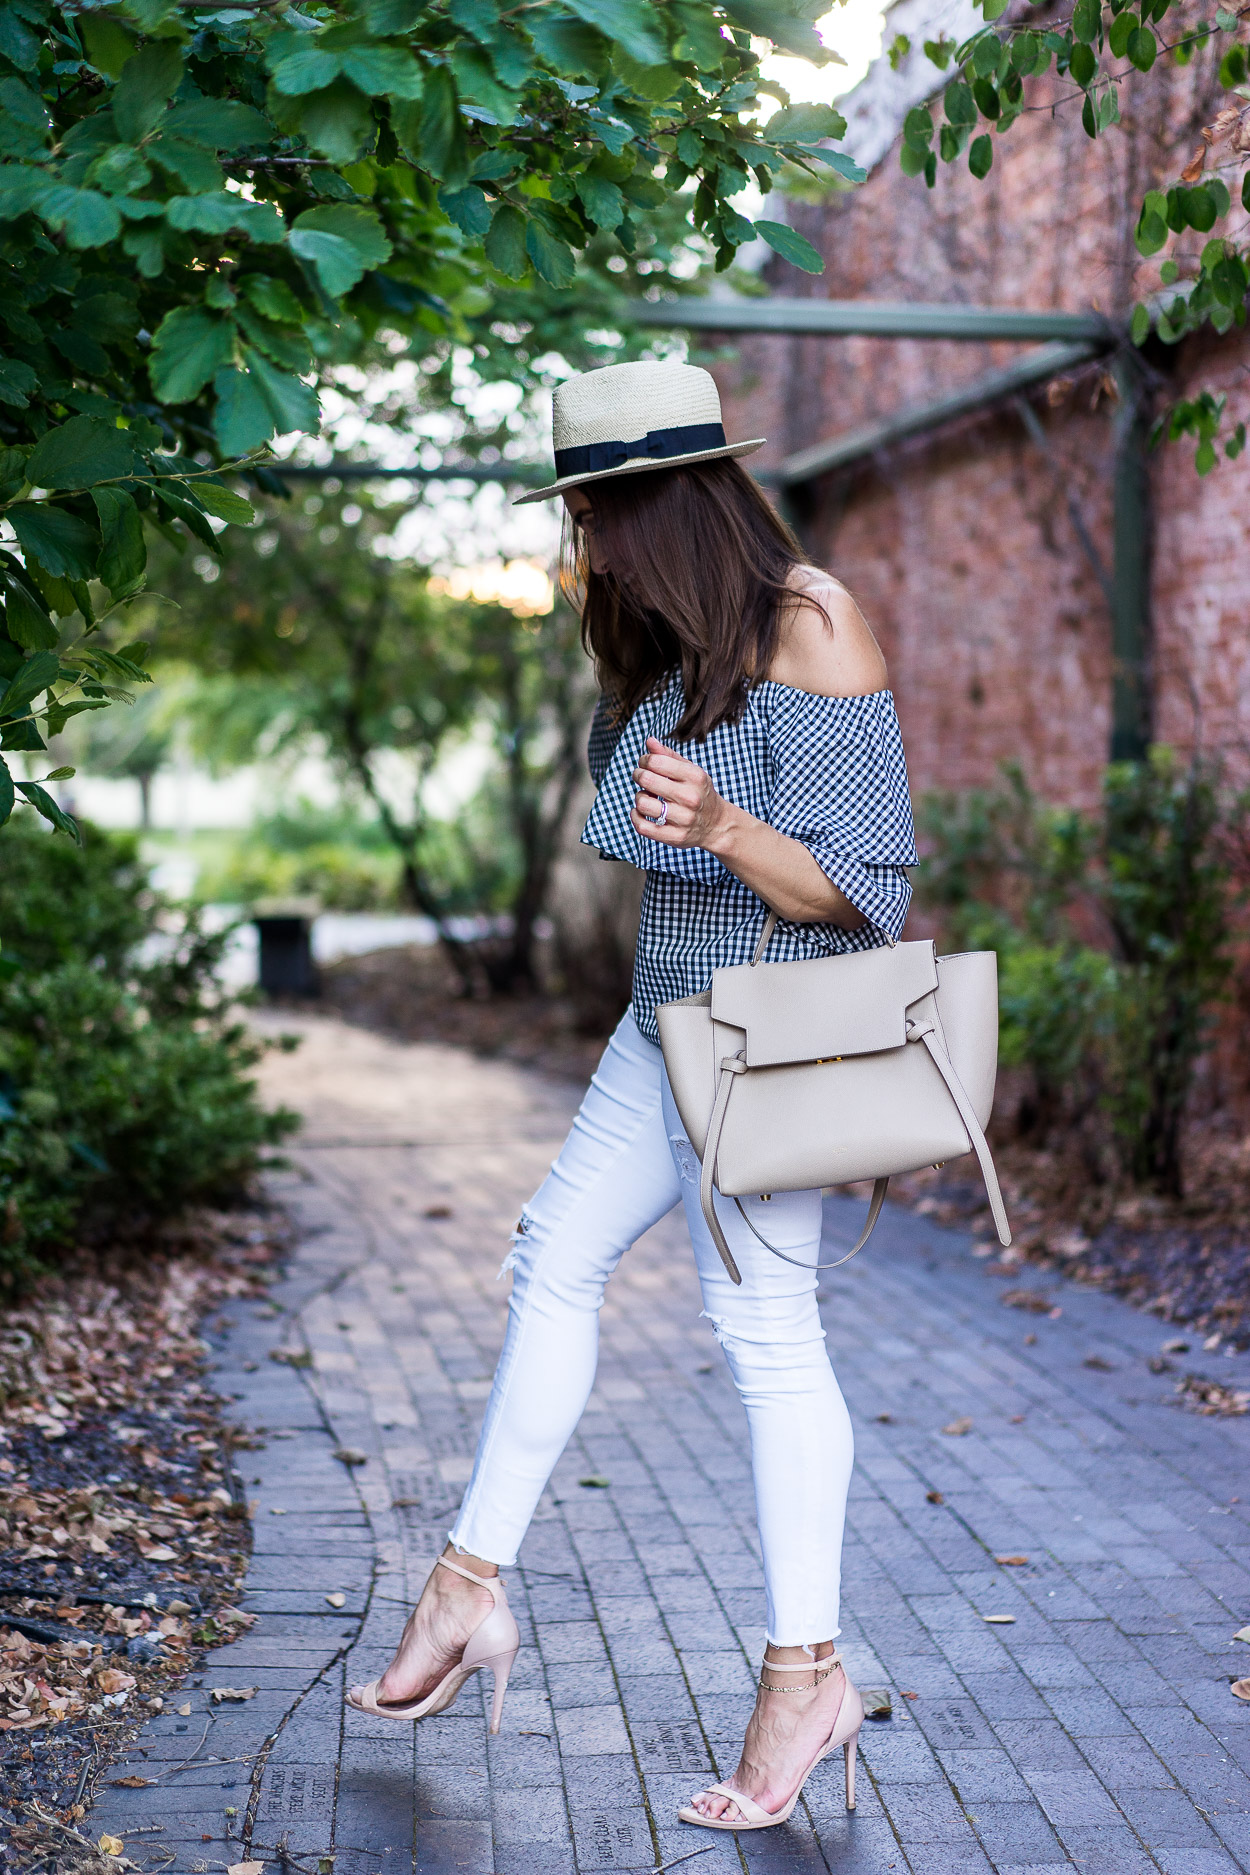 Easily transition your wardrobe from Summer to Fall with this Wayf gingham top and crisp white AG jeans a la blogger Amanda of A Glam Lifestyle